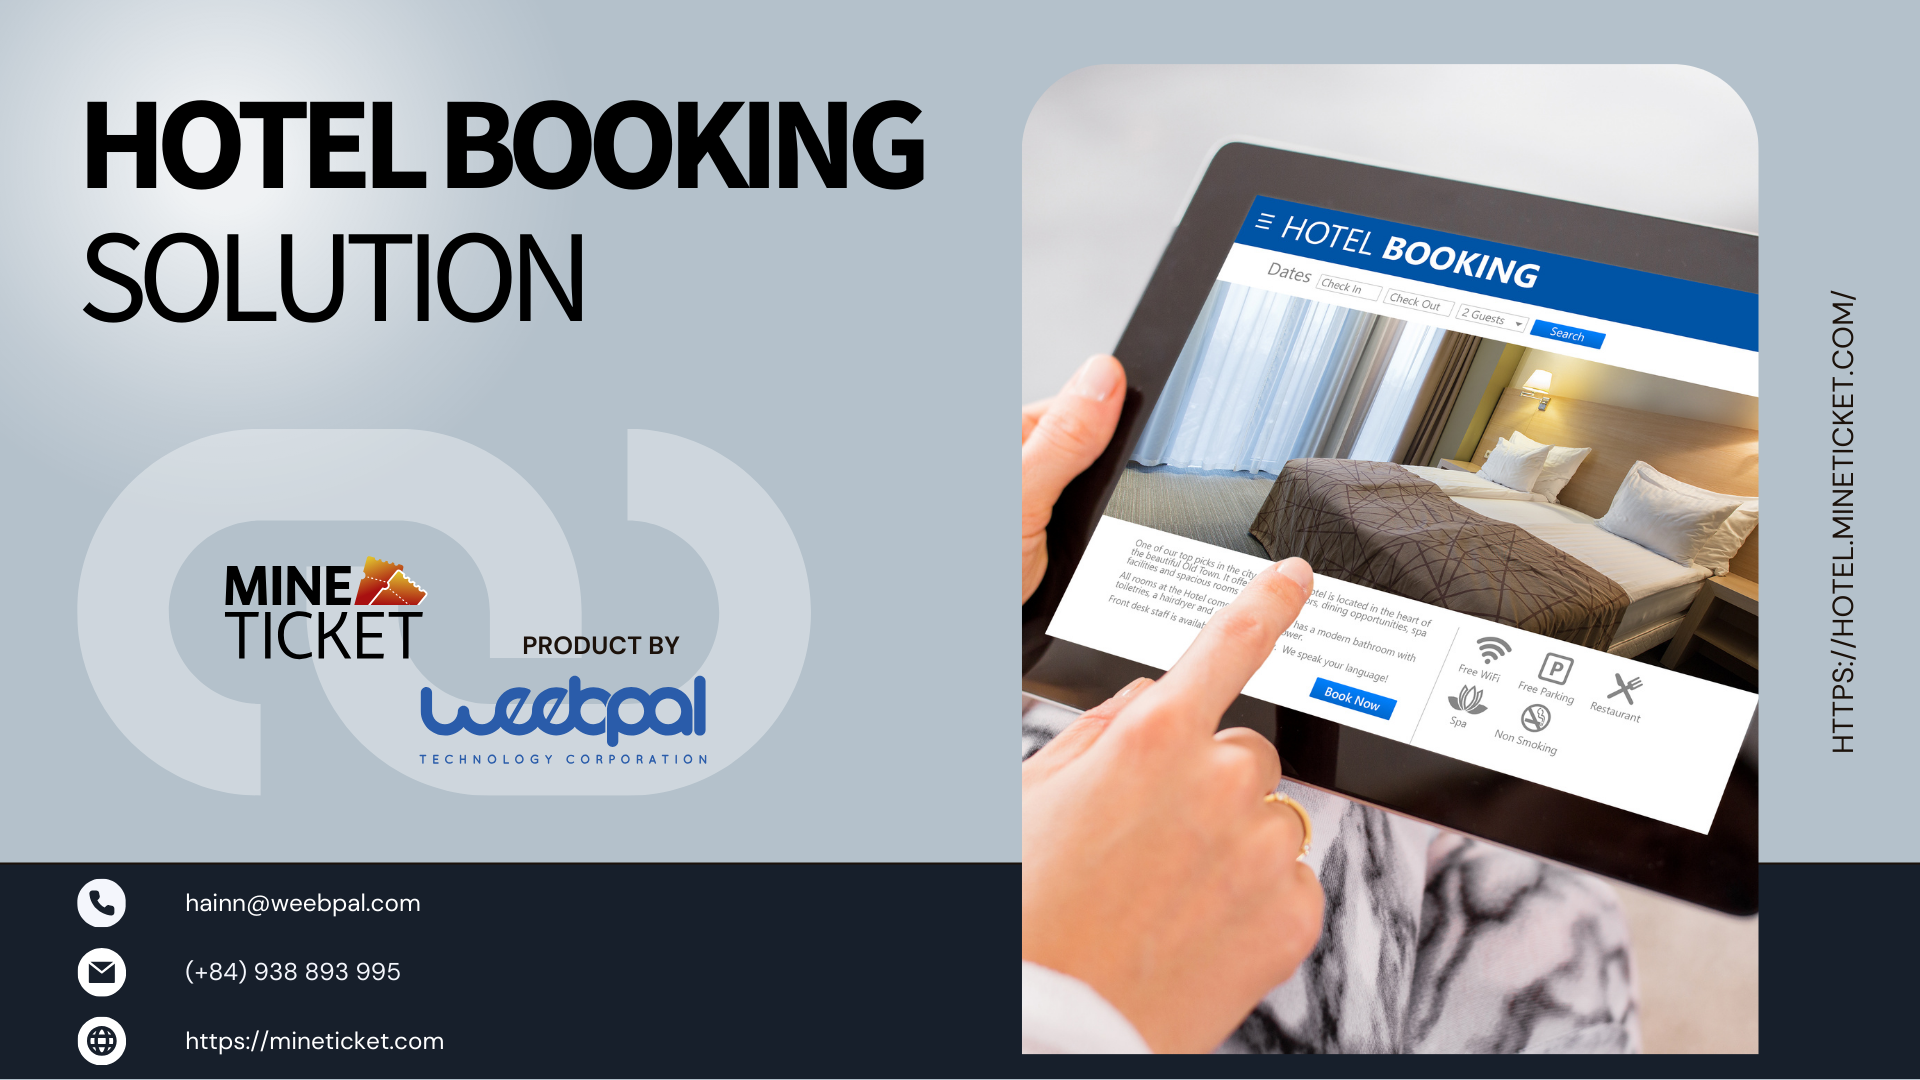 Your Premier Destination for Hotel Booking Solution